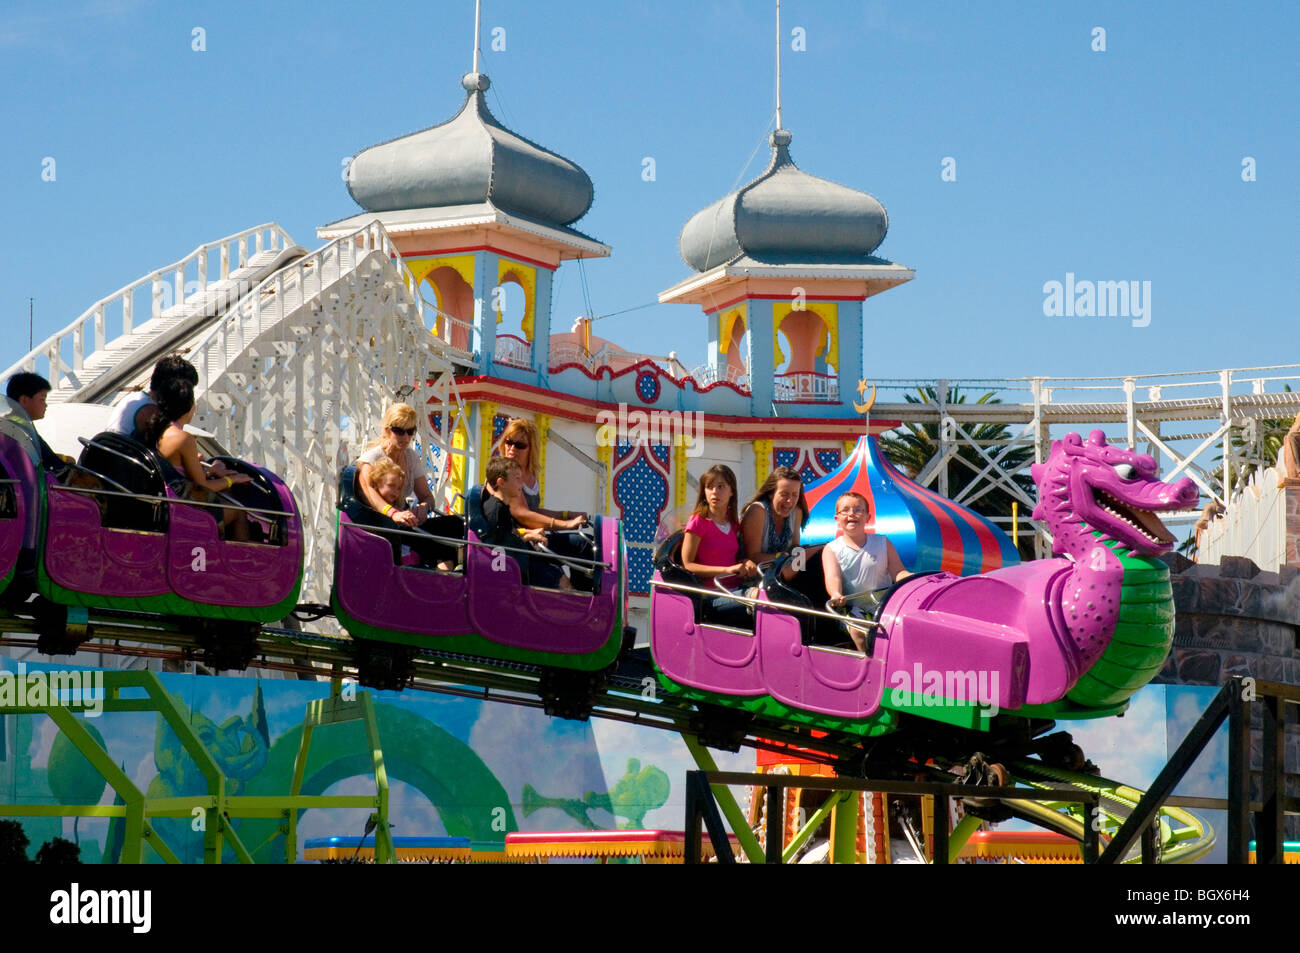 Riding the Silly Serpent at Luna Park, St Kilda, Melbourne, Australia. Behind is the century-old Scenic Railway rollercoaster Stock Photo